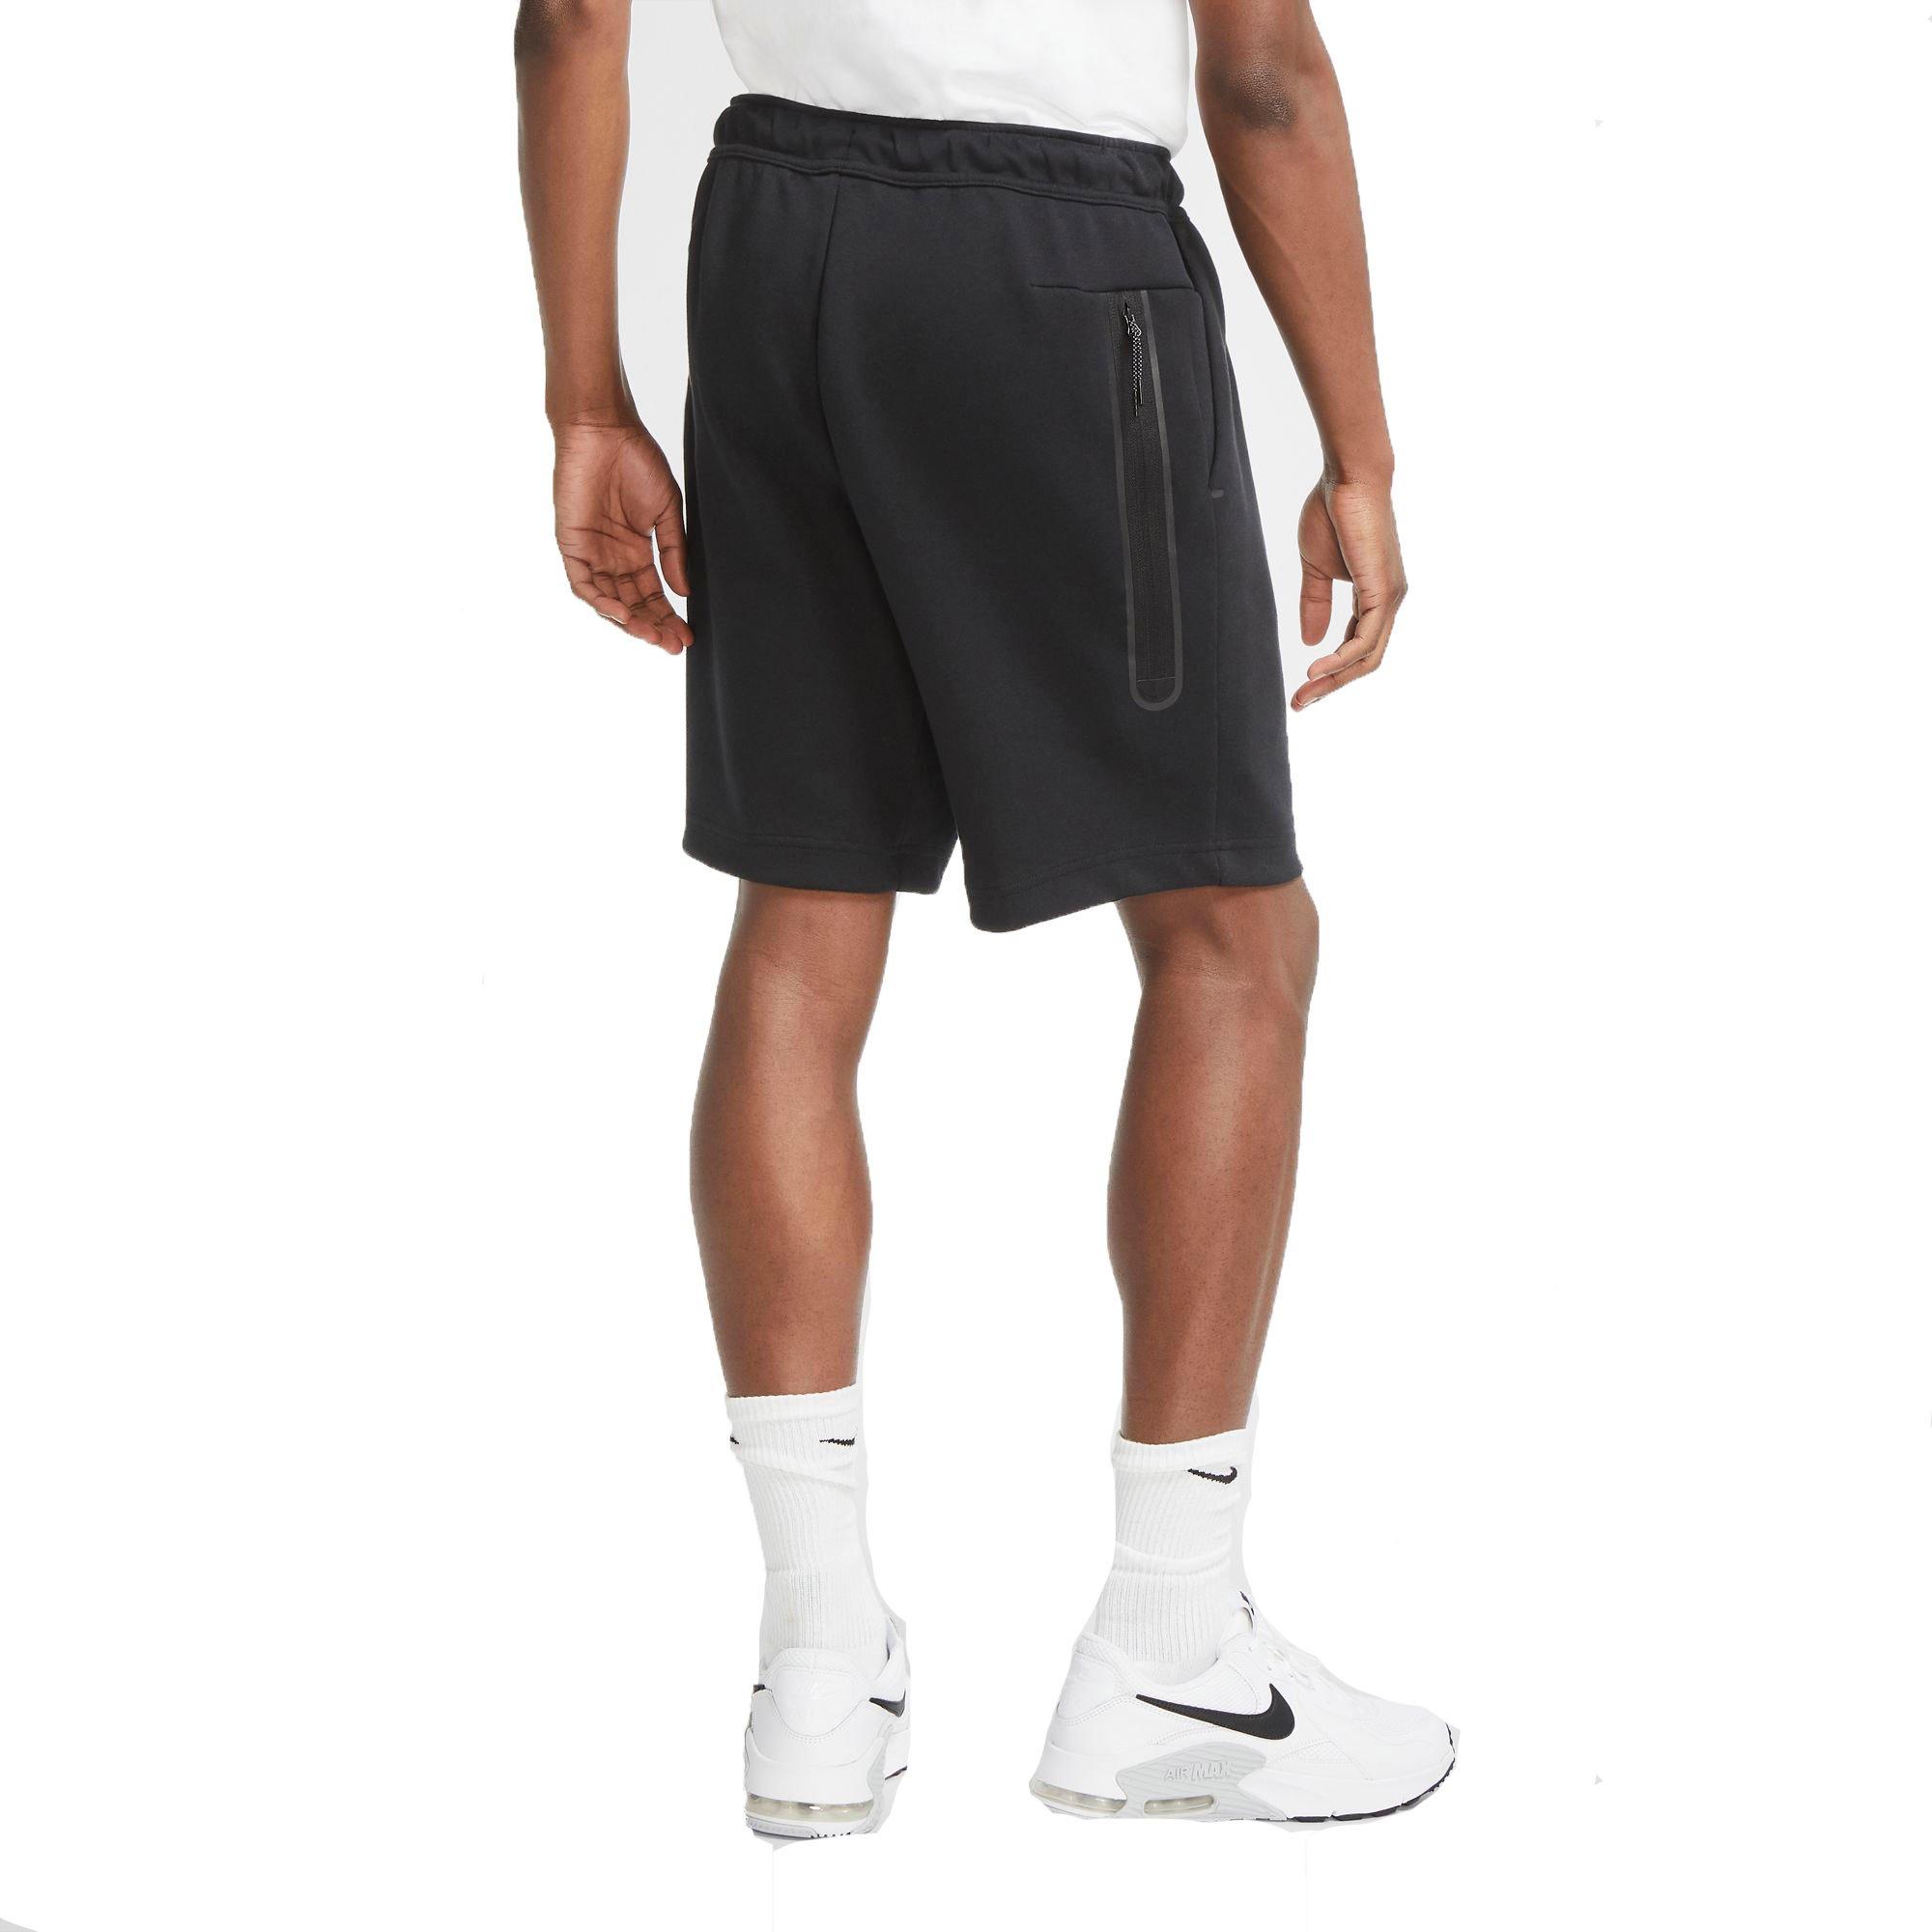 Nike NCAA College Toddlers Oklahoma State Cowboys Basketball Shorts, Black - 2T